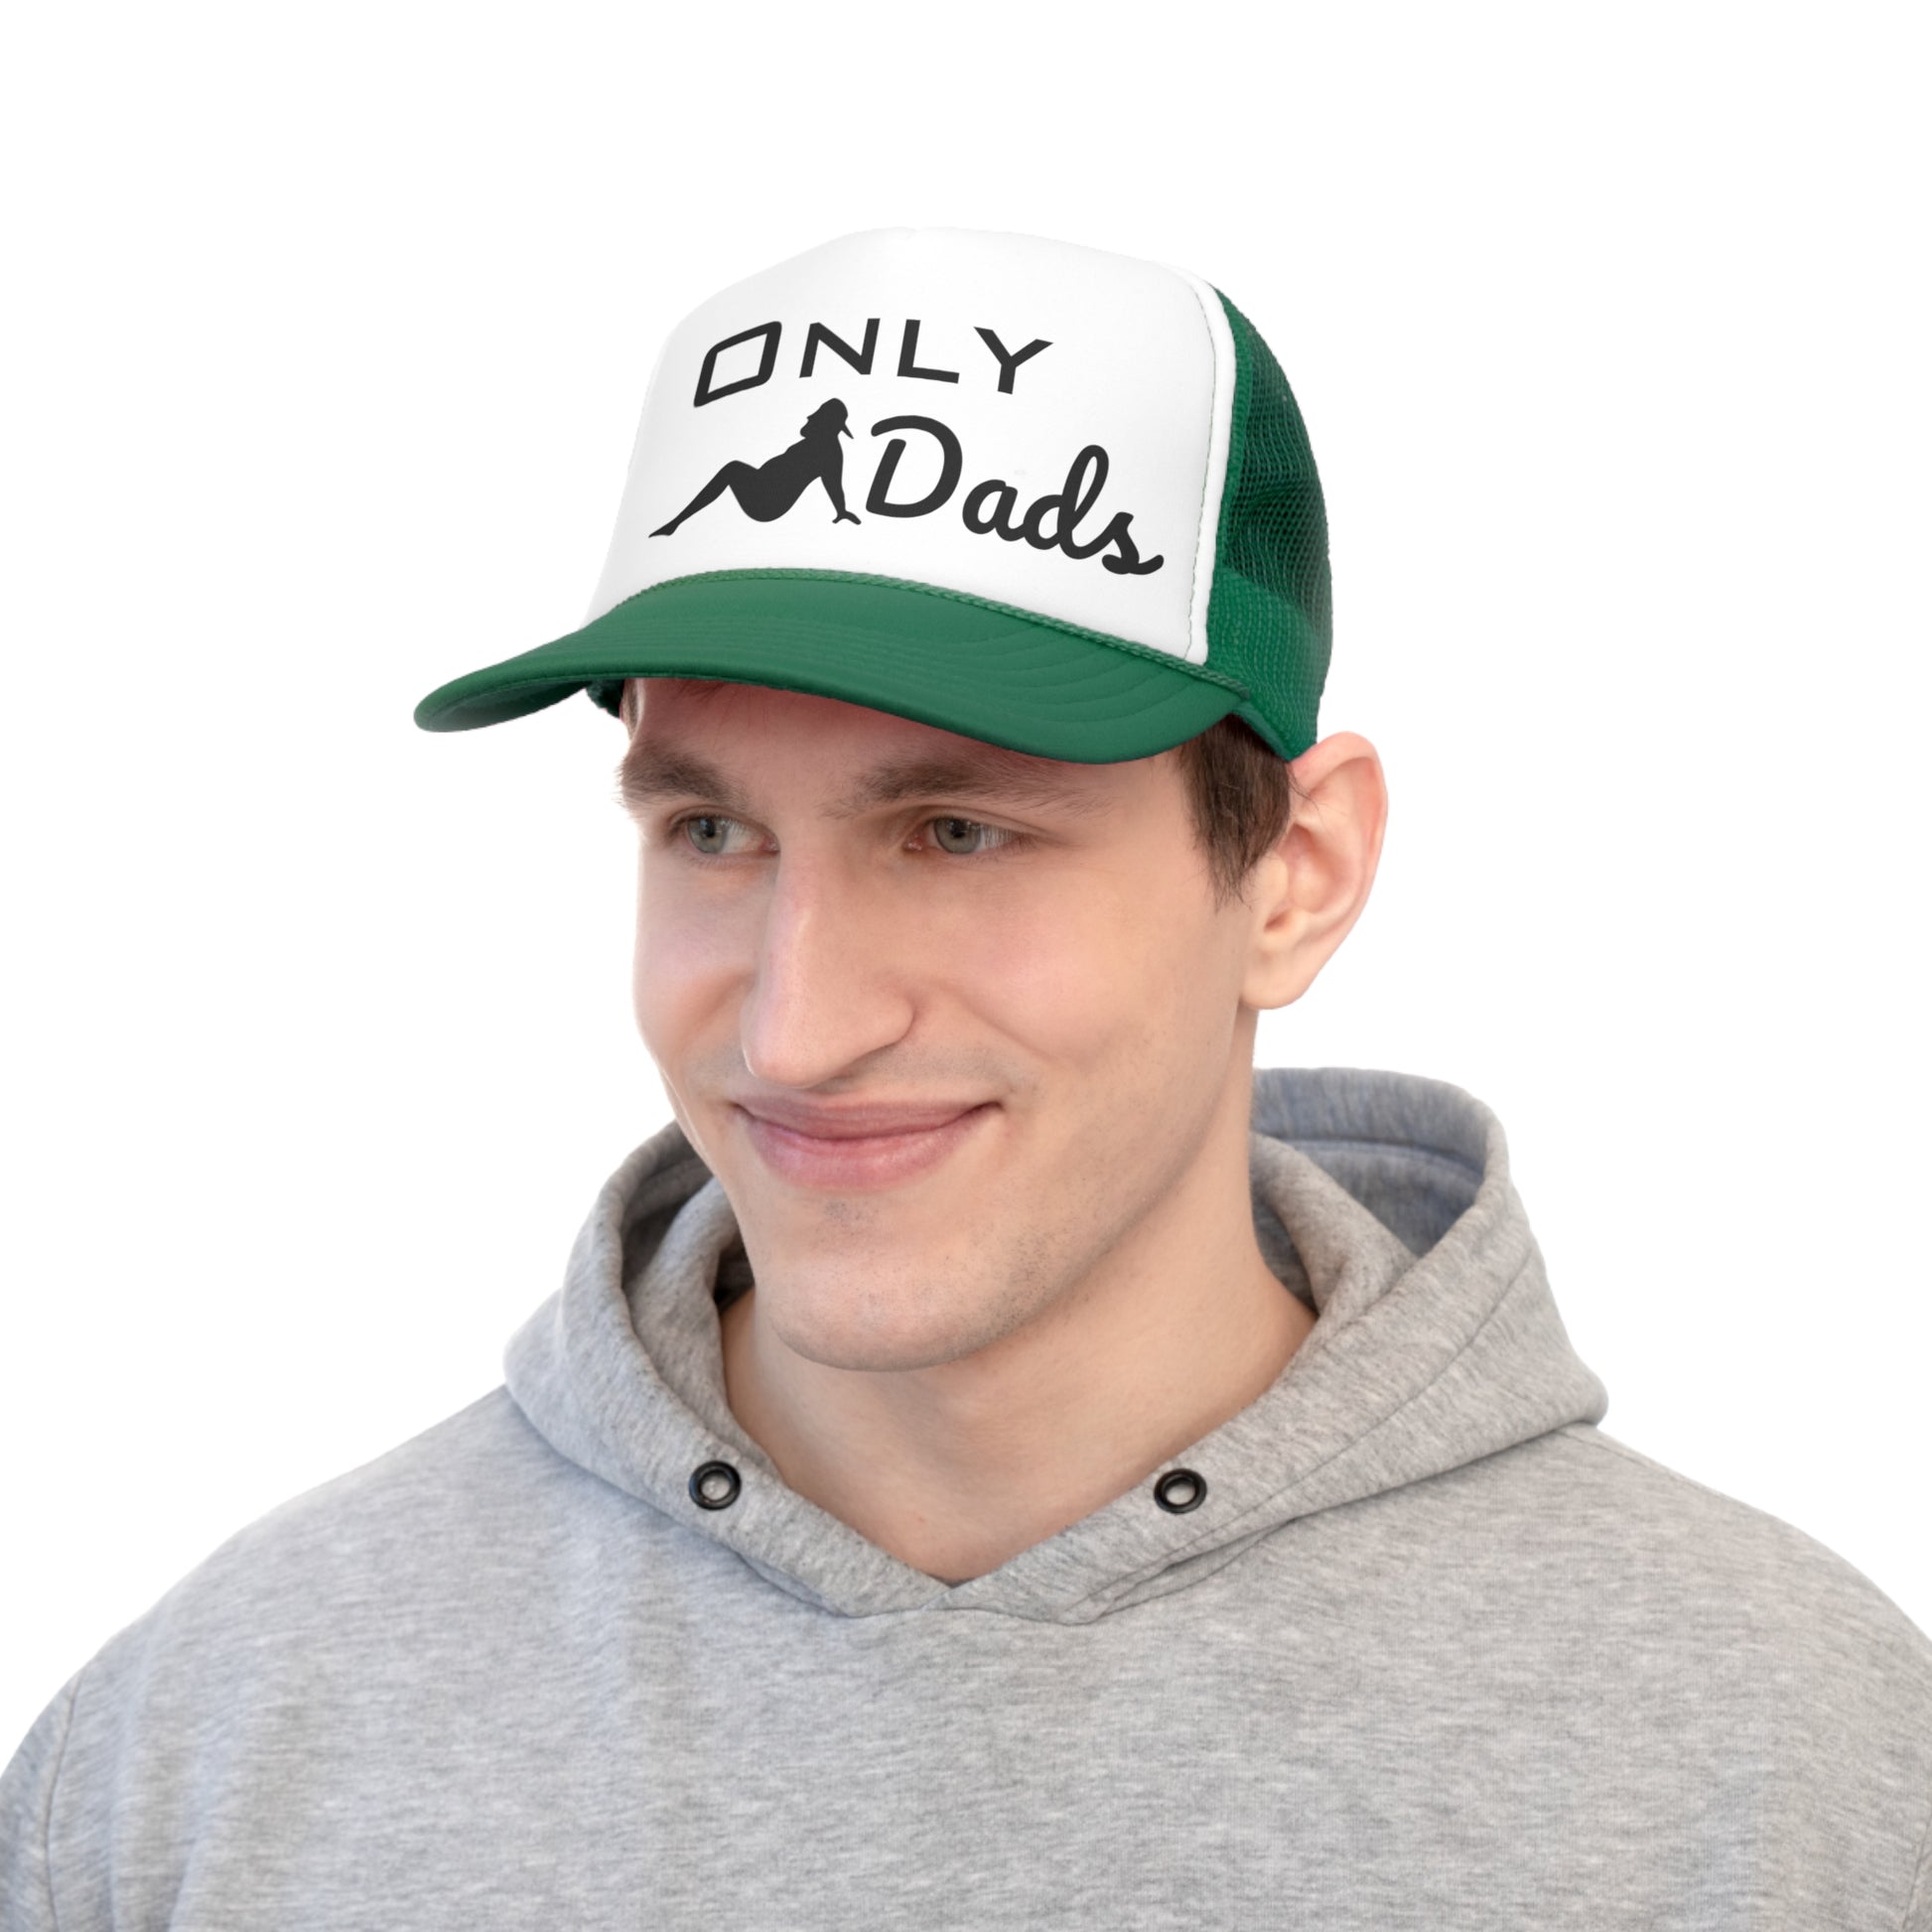 funny only fans - only dads bod hat